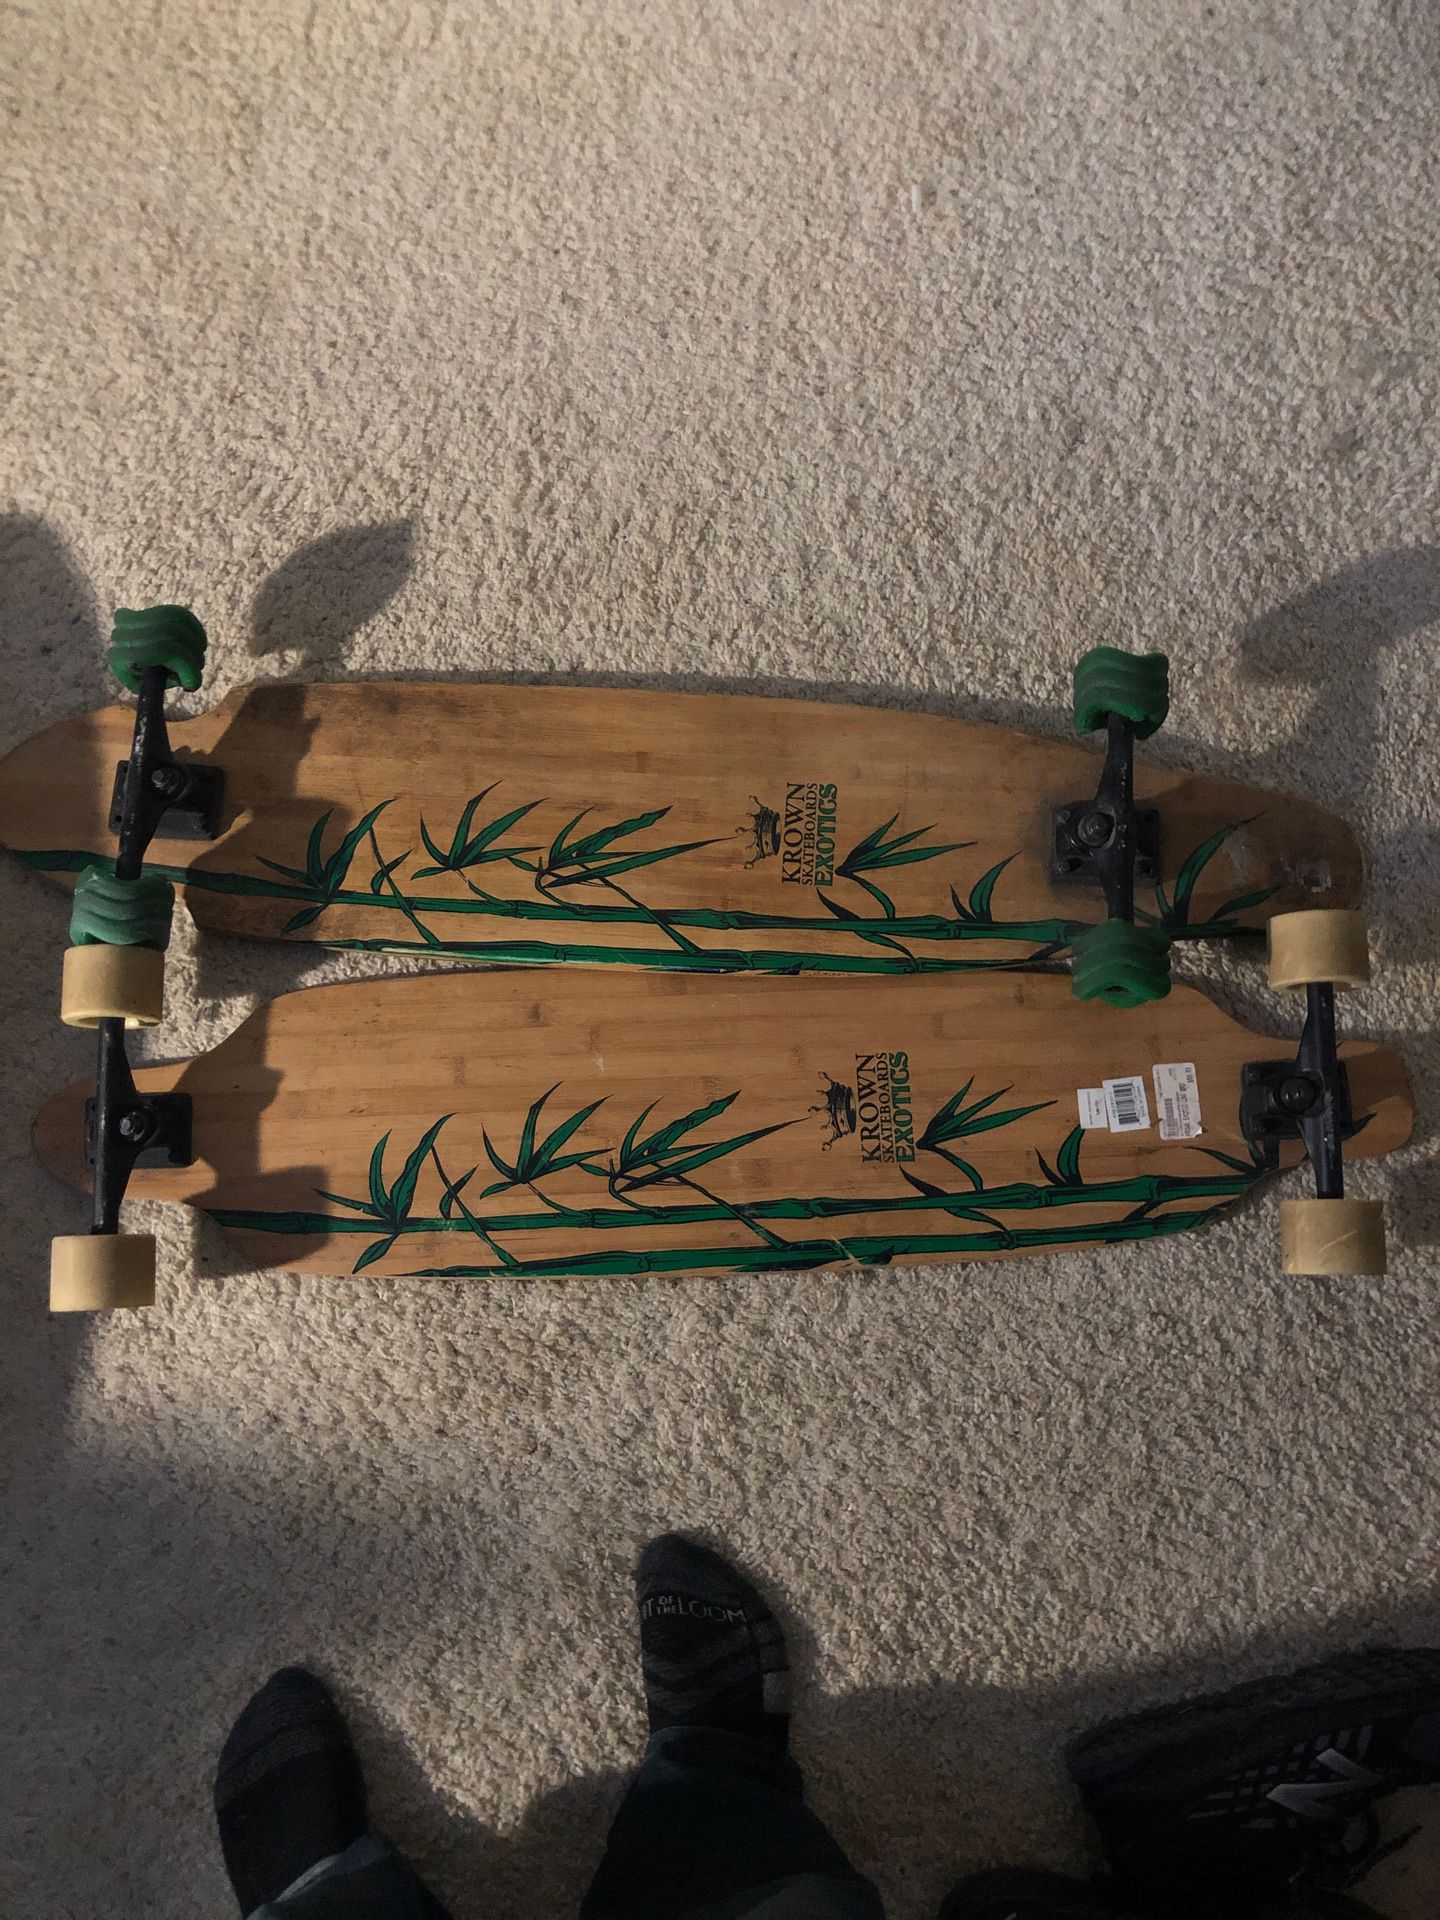 Two boards 50 total or 30 a piece